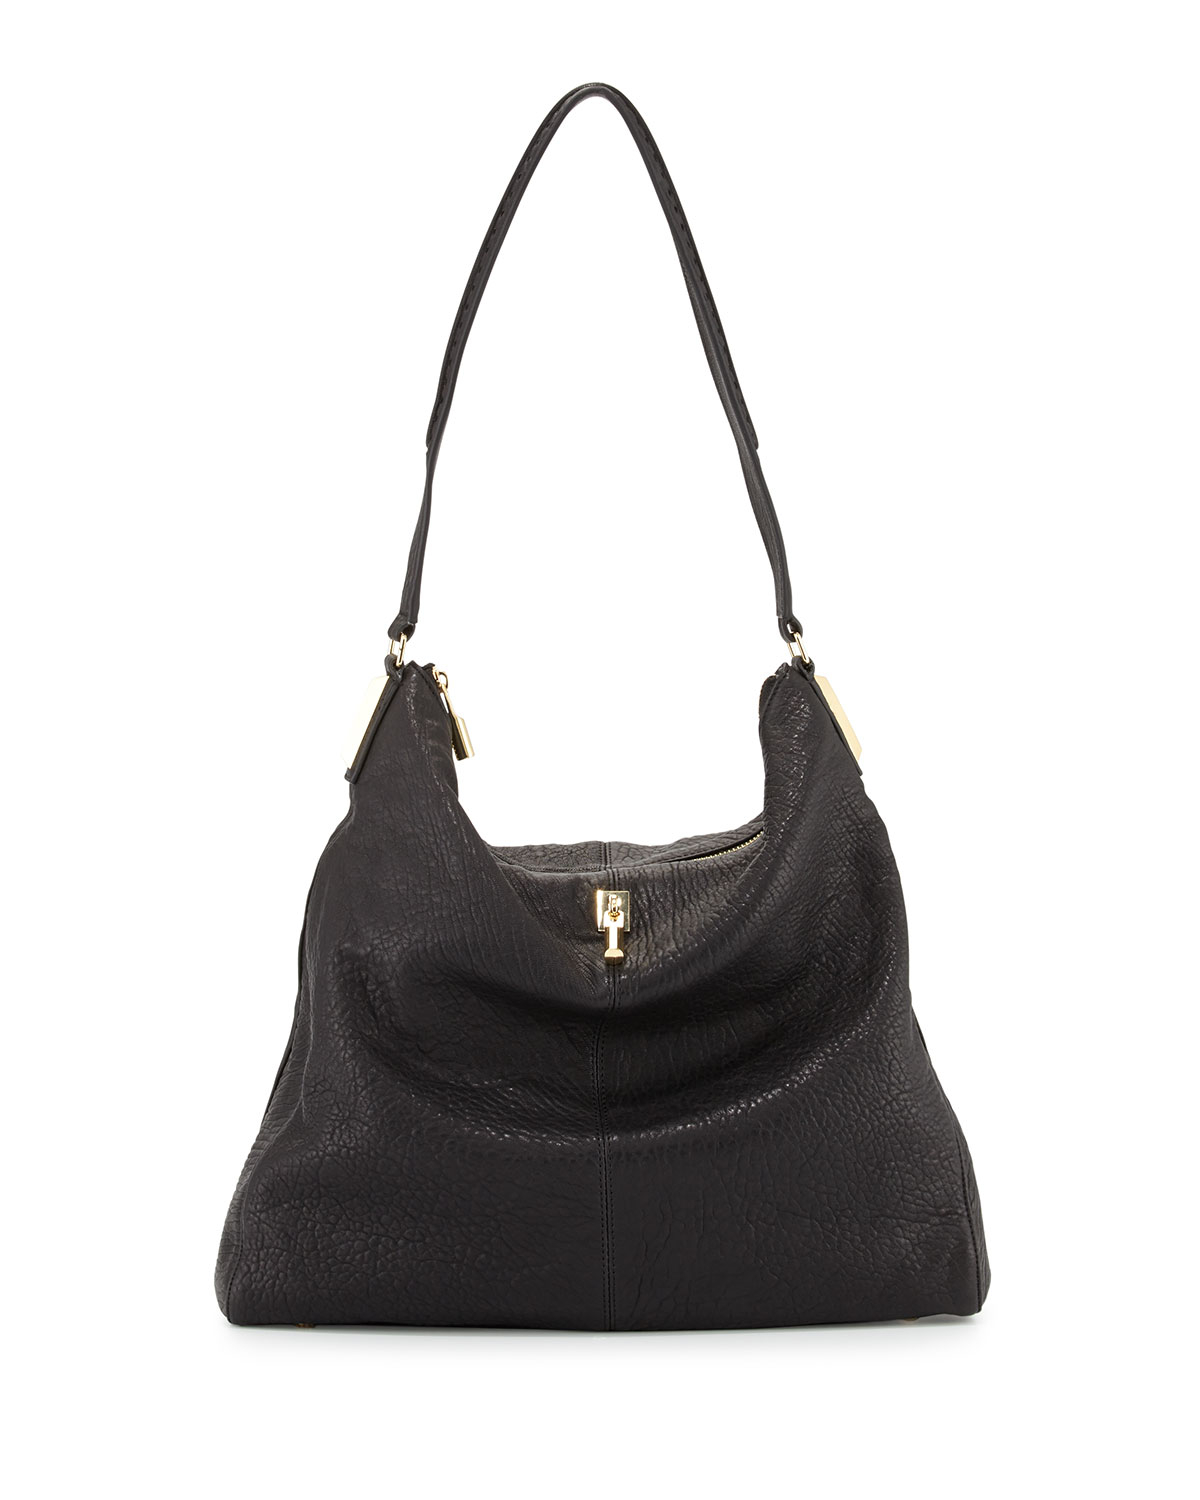 Lyst - Elizabeth And James Pyramid Leather Hobo Bag in Black